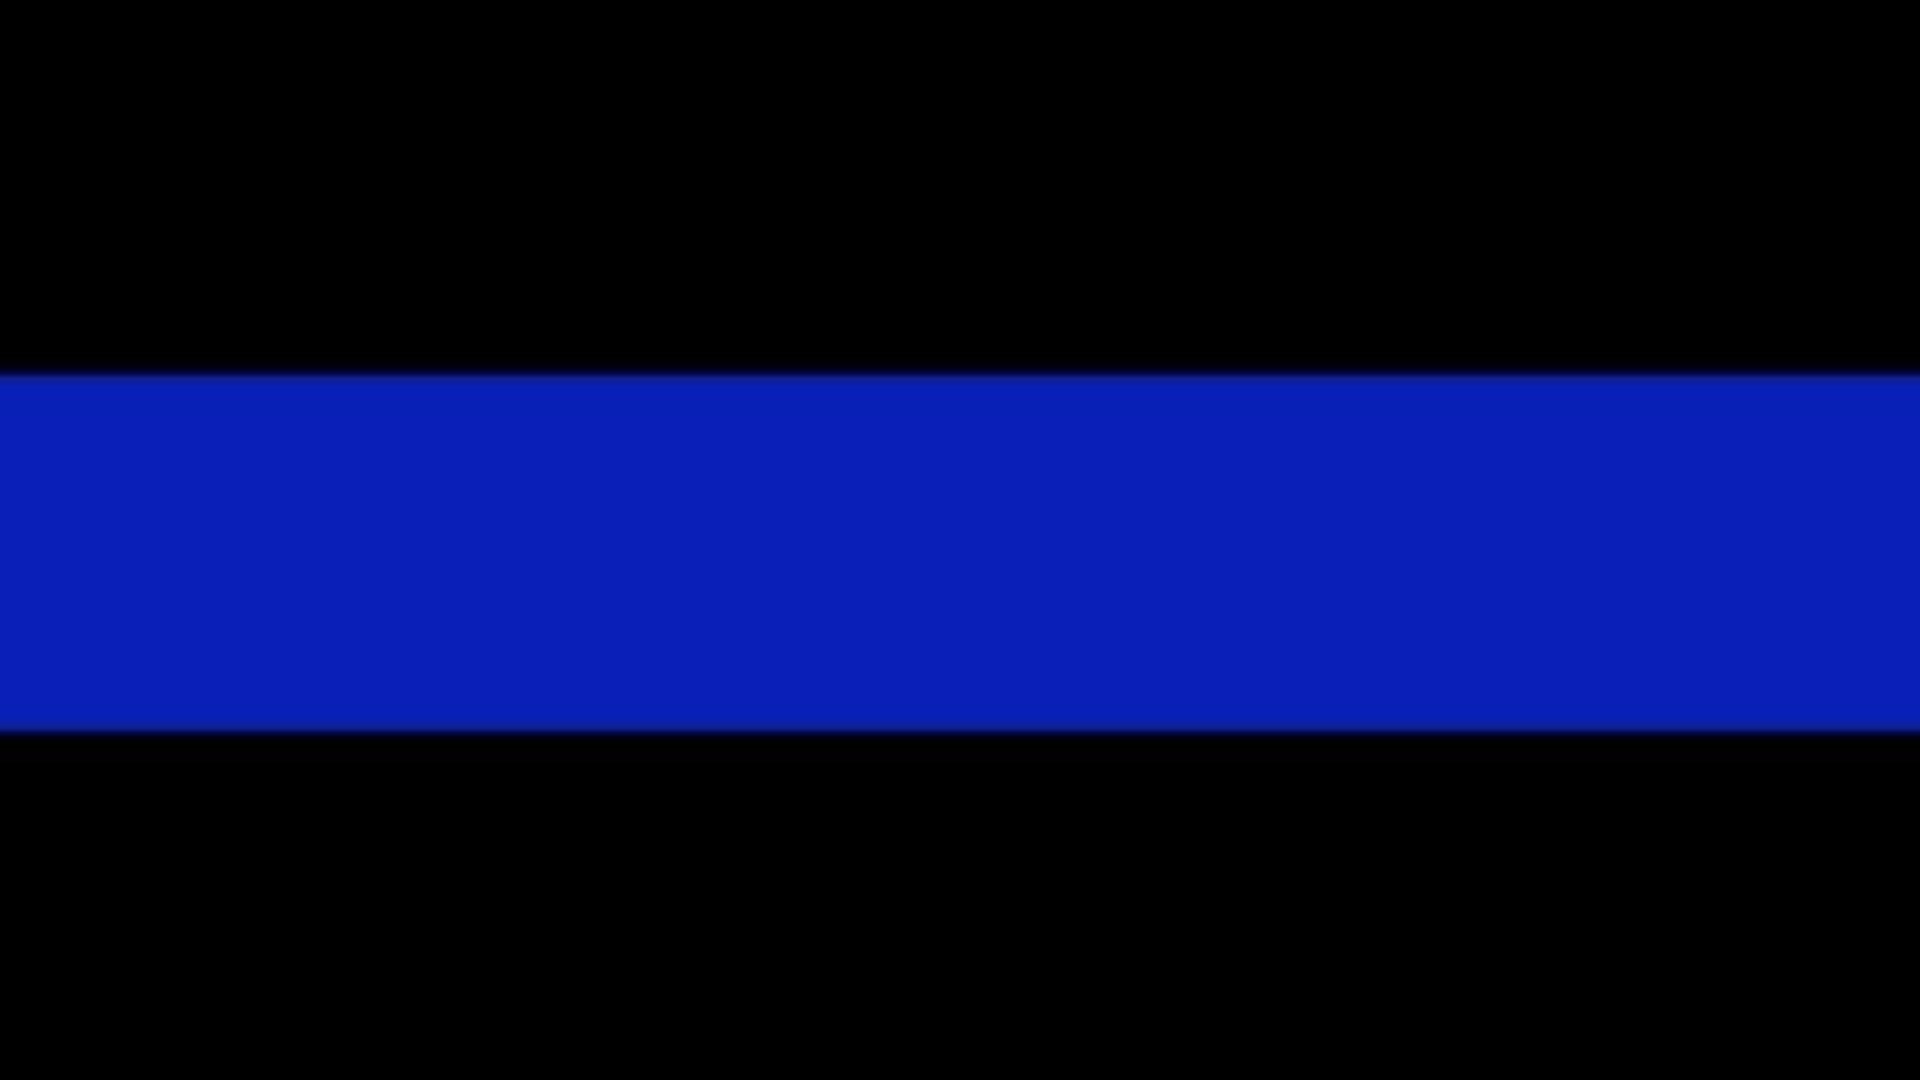 Battlefield Hardline Montage The Thin Blue Line A Tribute For Those Who Serve In Law Enforcement – YouTube